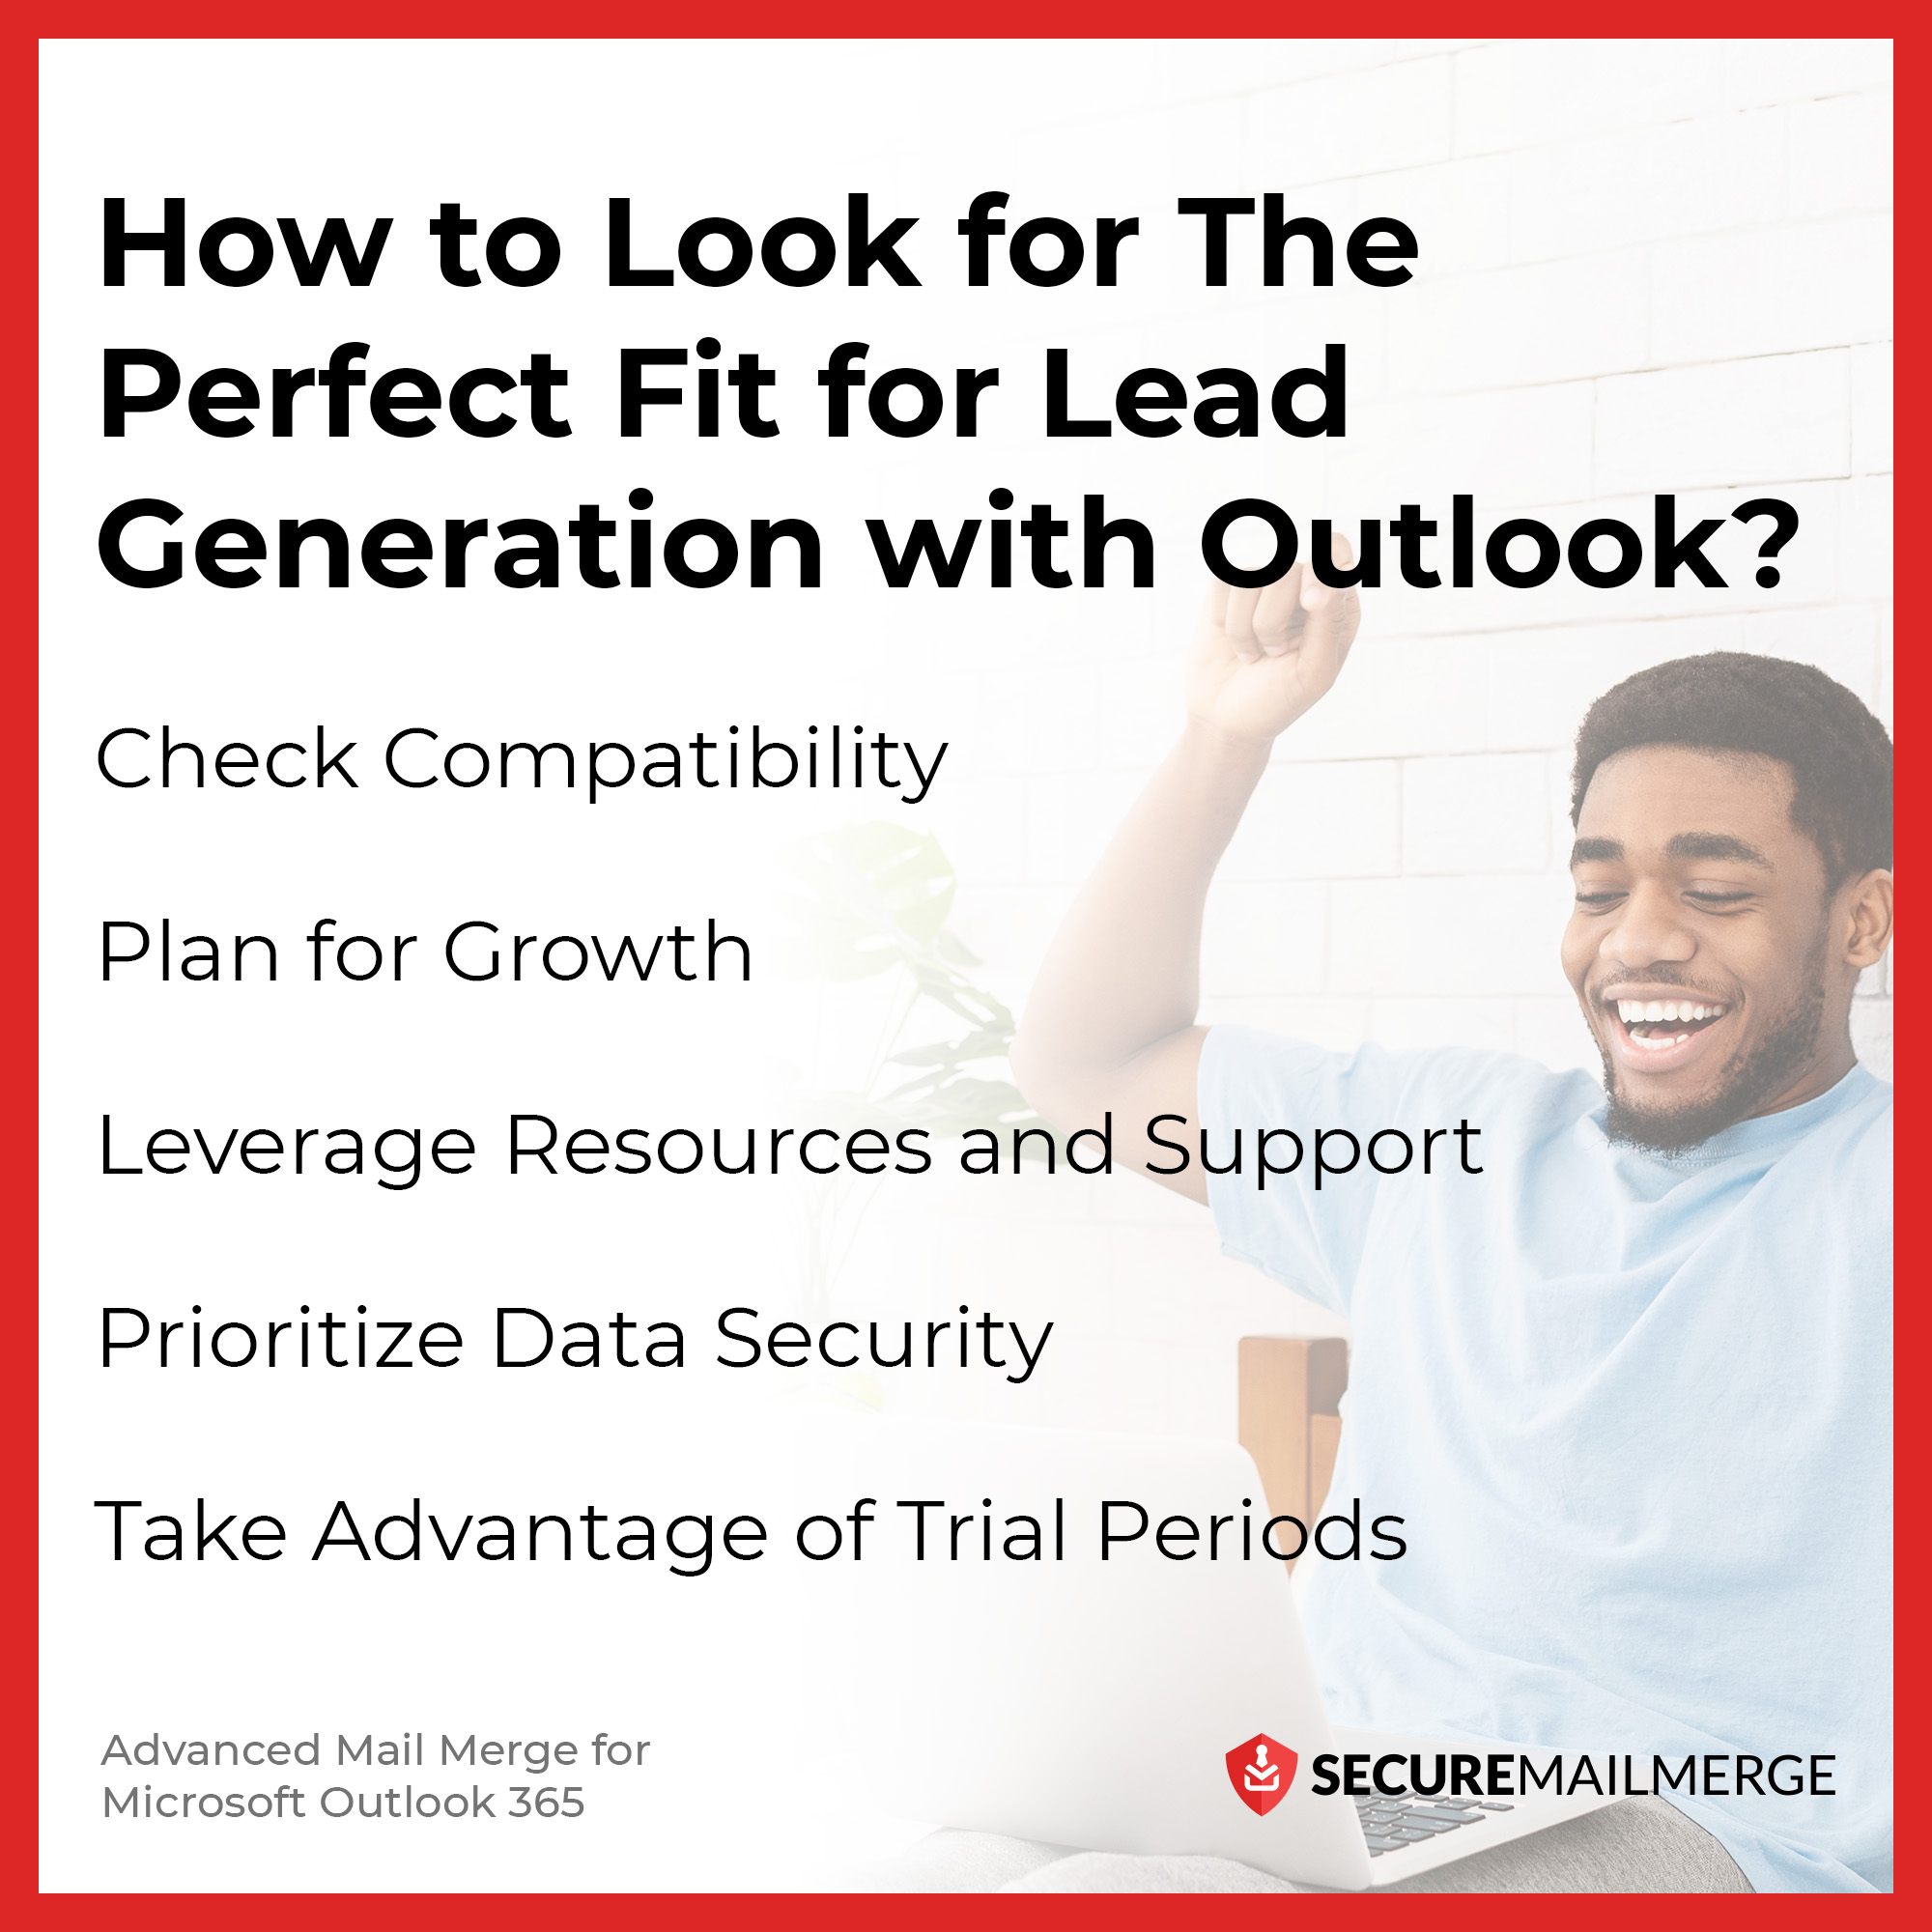 How to Look for The Perfect Fit for Lead Generation with Outlook?